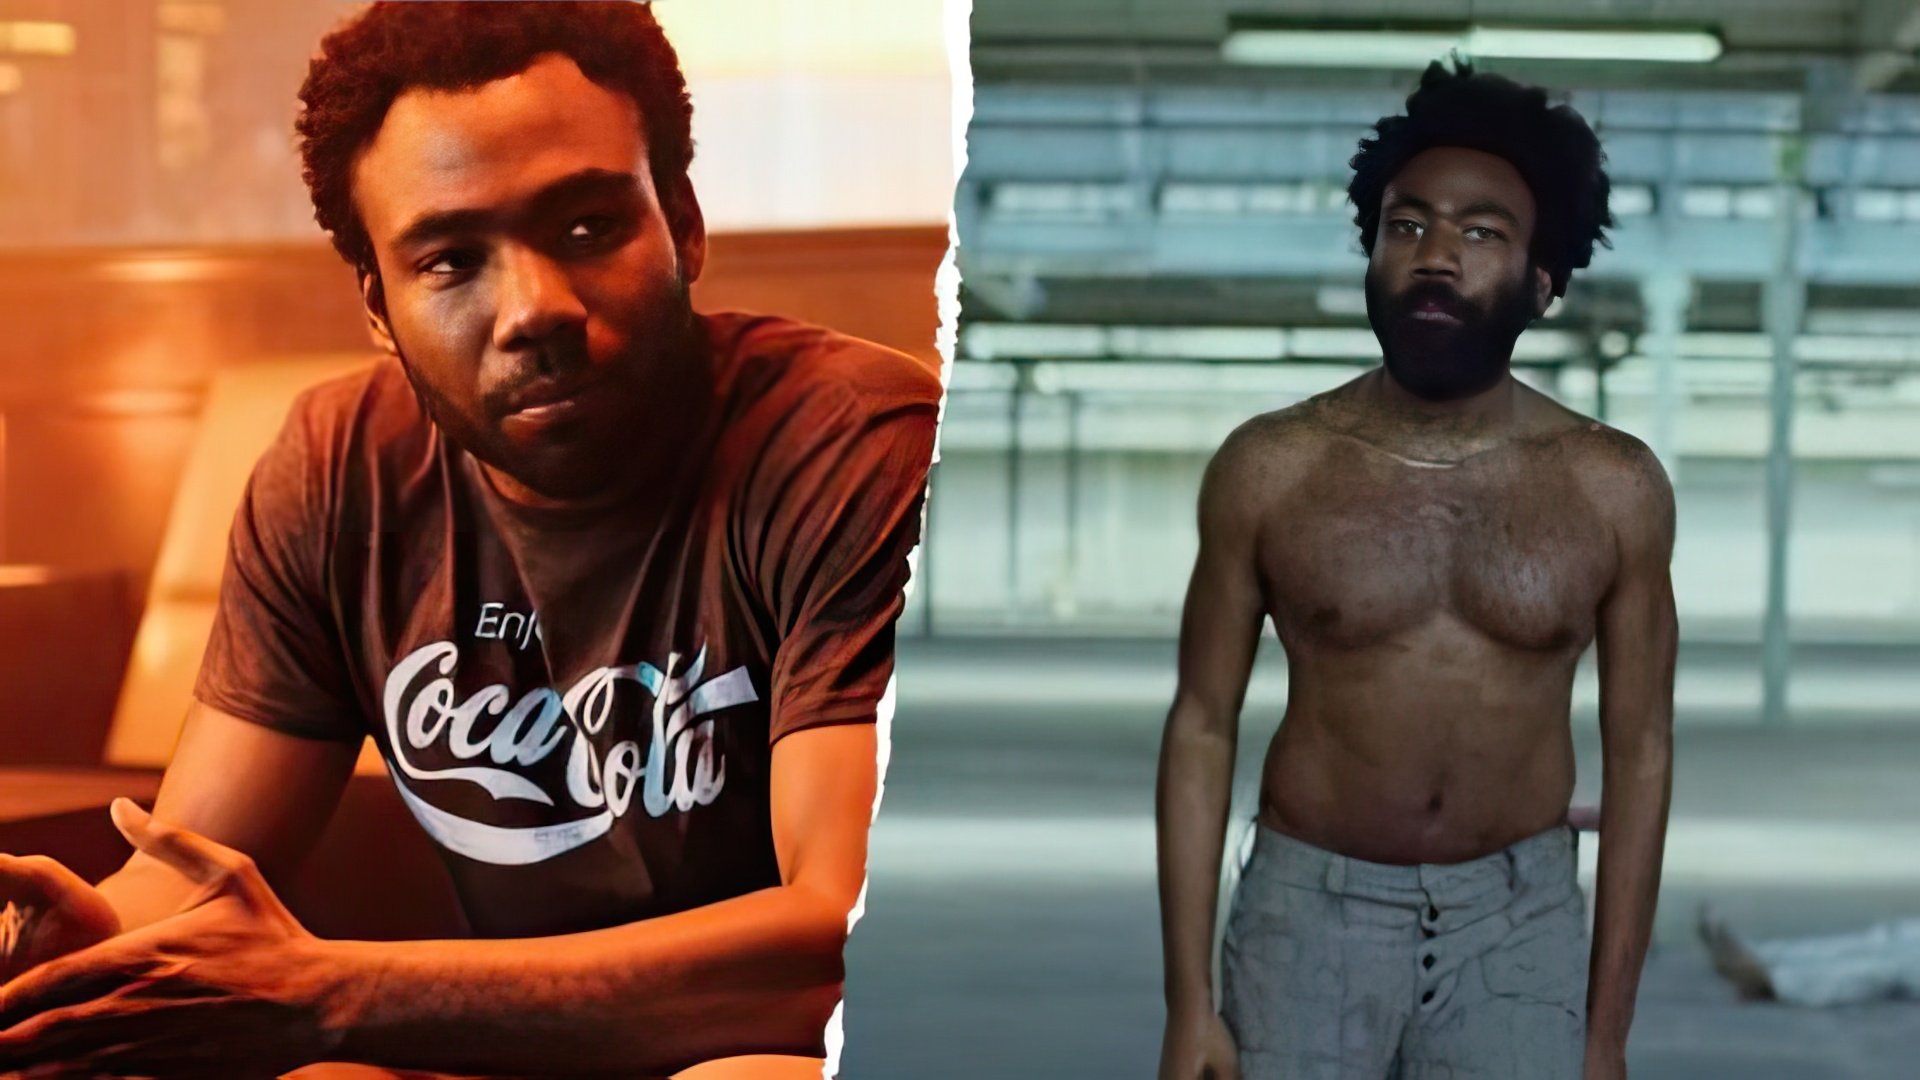 Actor Donald Glover and a singer Childish Gambino is the same person